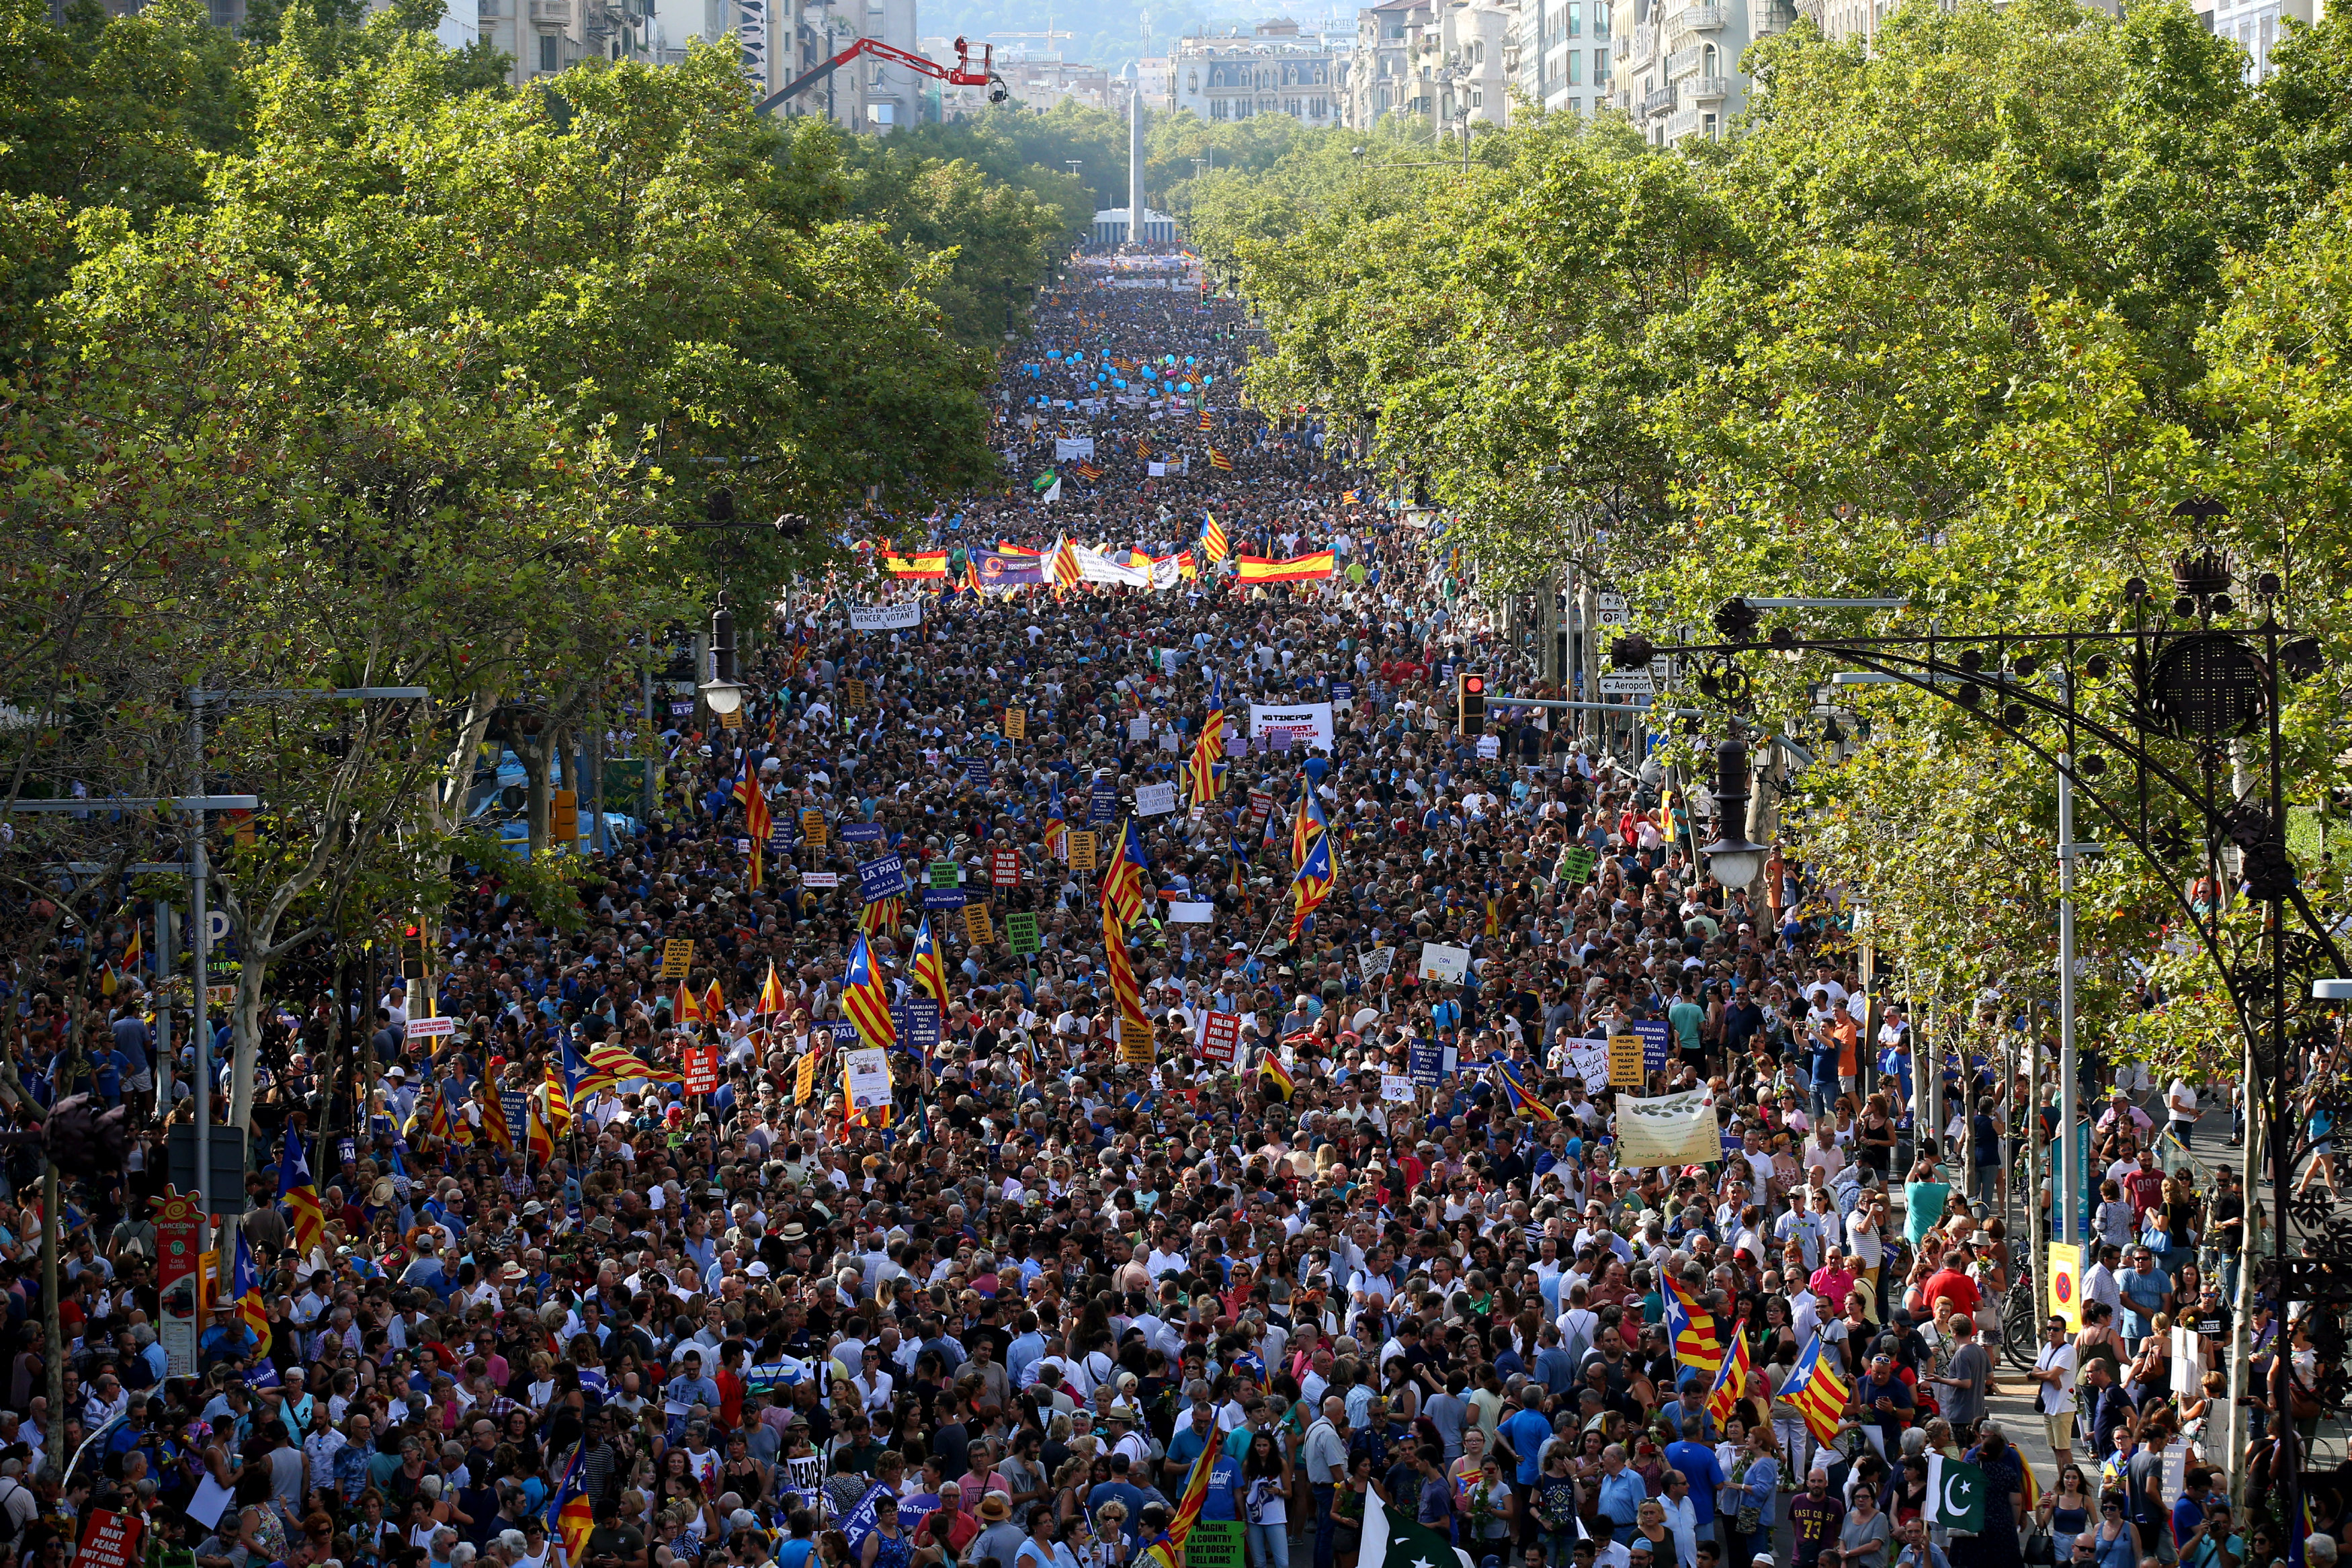 Spain: Hundreds of thousands march in Barcelona to show unity after extremist attacks